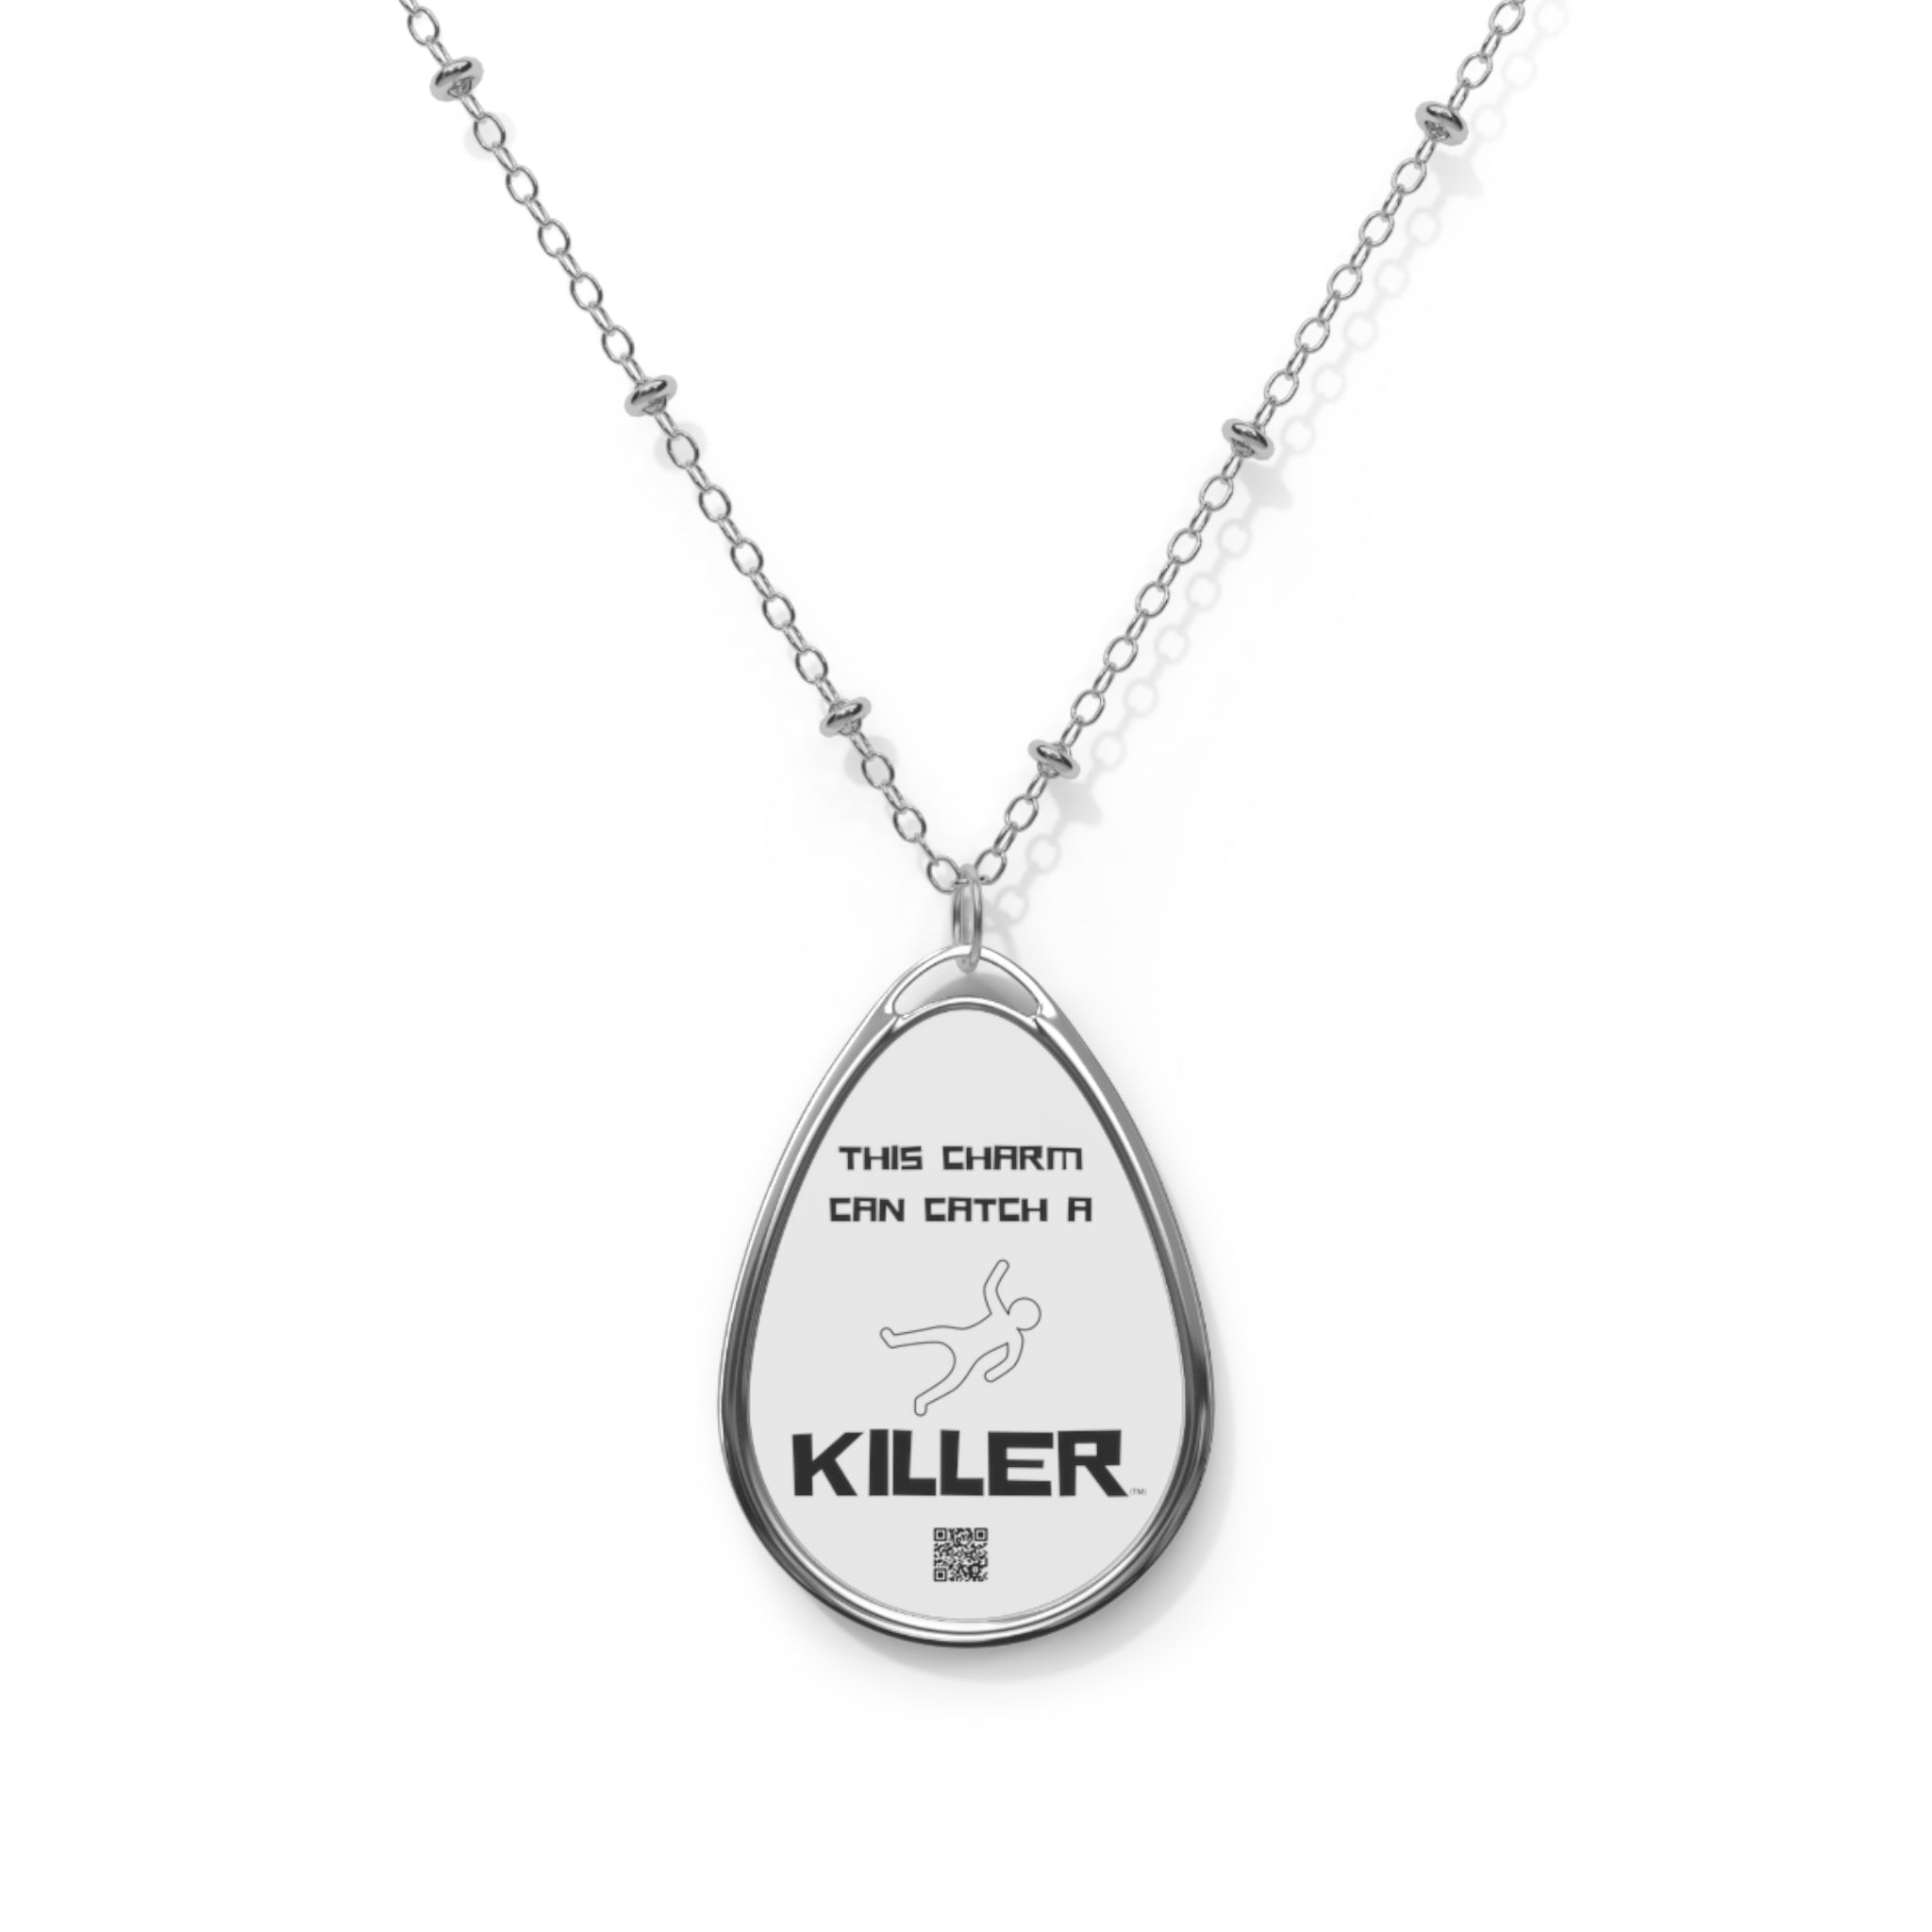 Catch A Killer (TM) - Oval Necklace - This Charm Can Catch A Killer (TM)